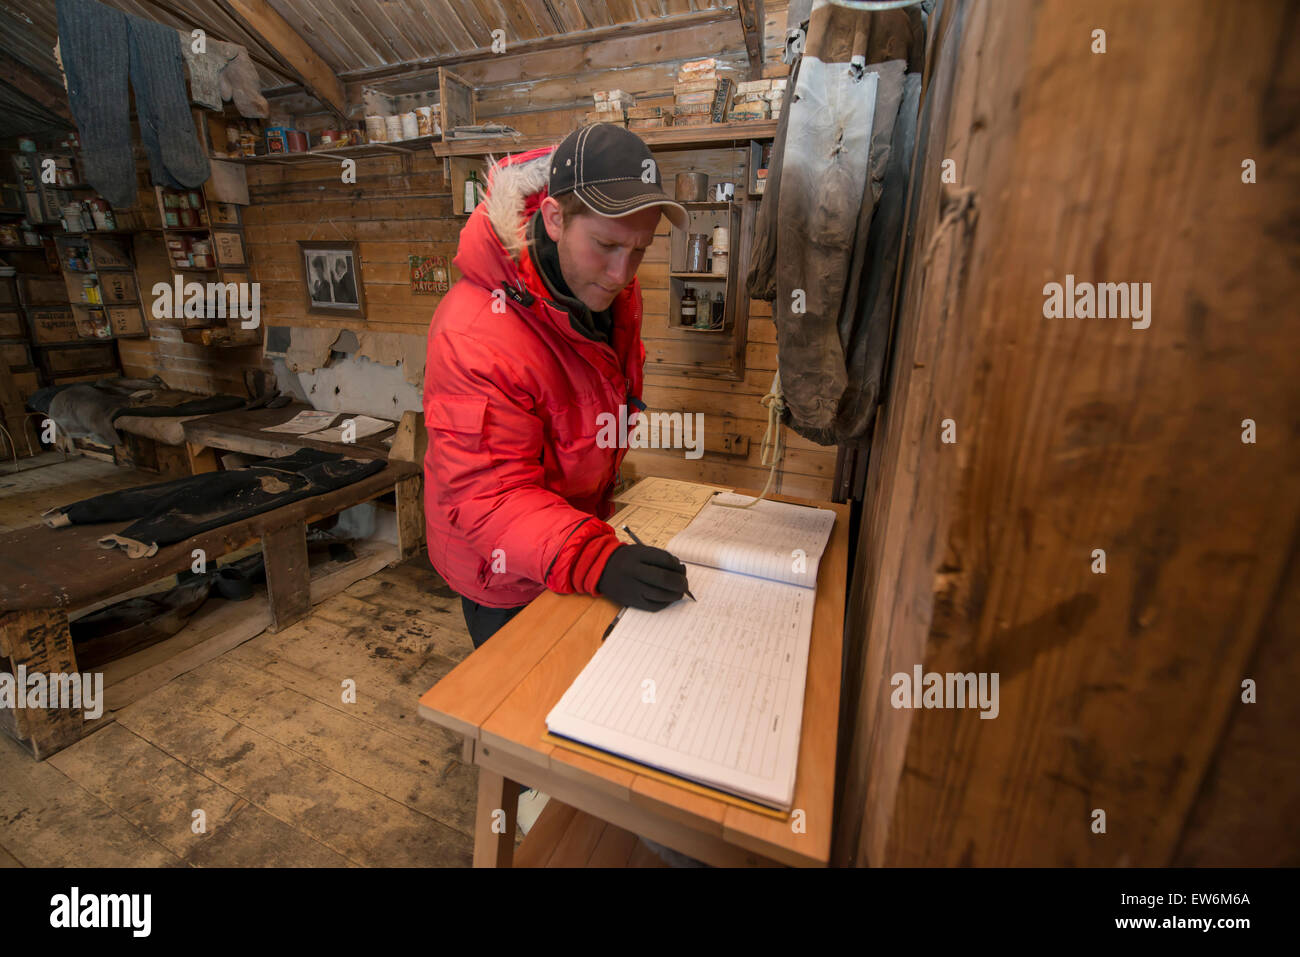 Signing the guest book inside Earnest Shackletons Hut at Cape Royds, Antarctica. Stock Photo